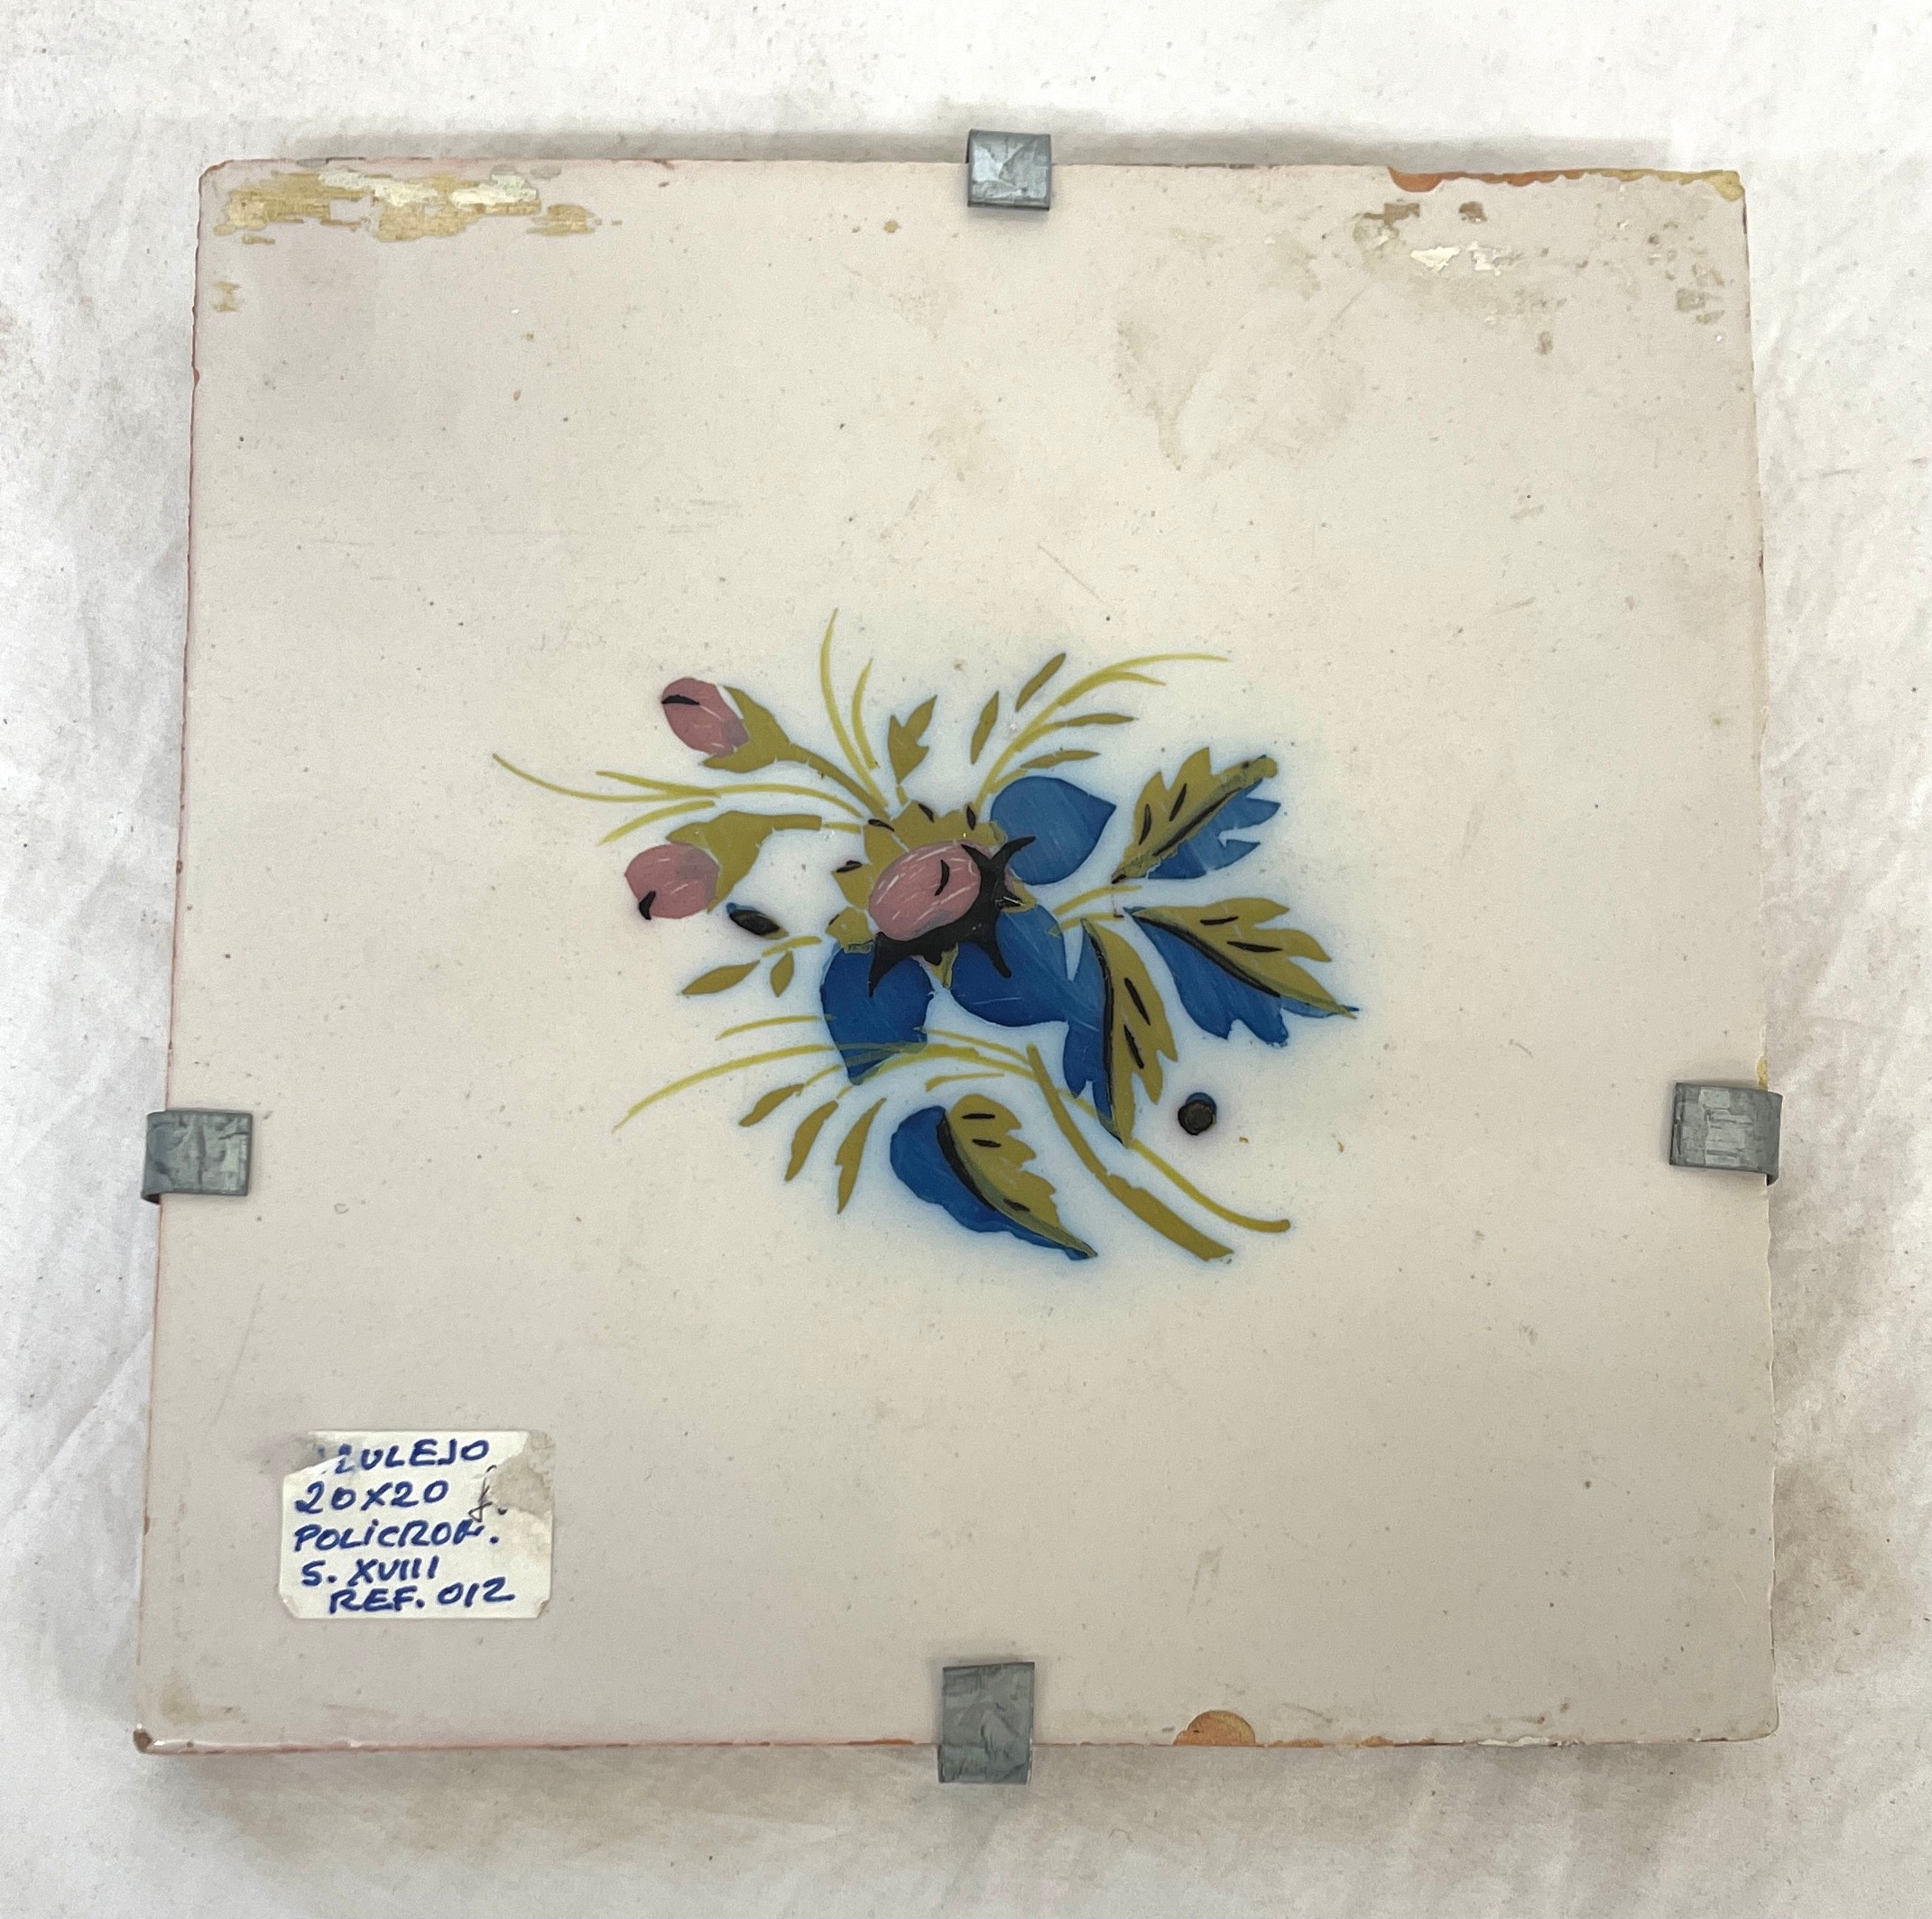 Antique Policrop tile, approximate measurement 8 by 8 inches